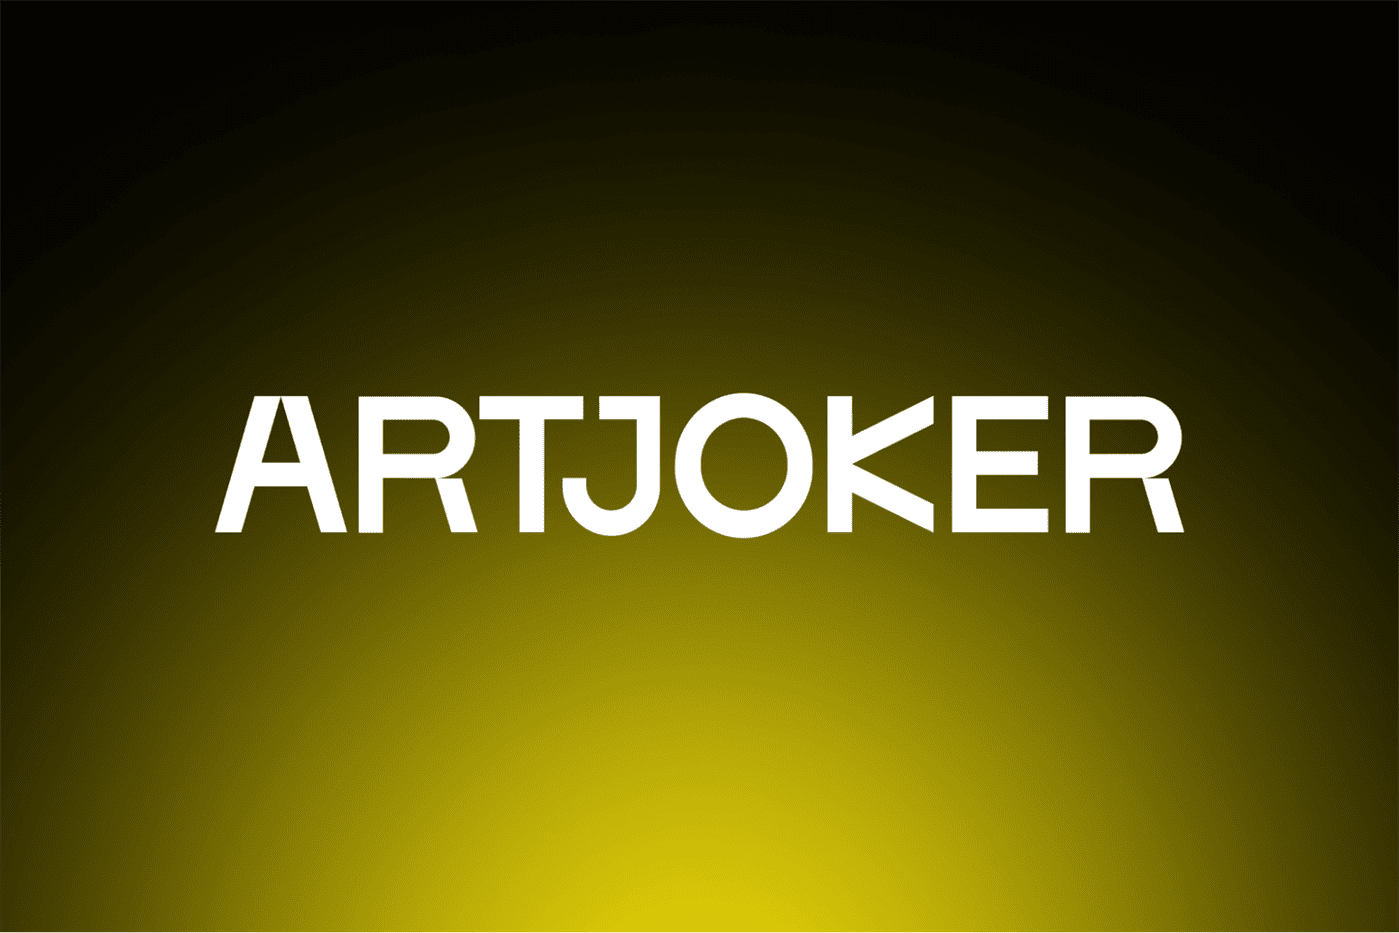 ARTJOKER's Logo Design: Conveying Professionalism and Reliability in the IT Industry